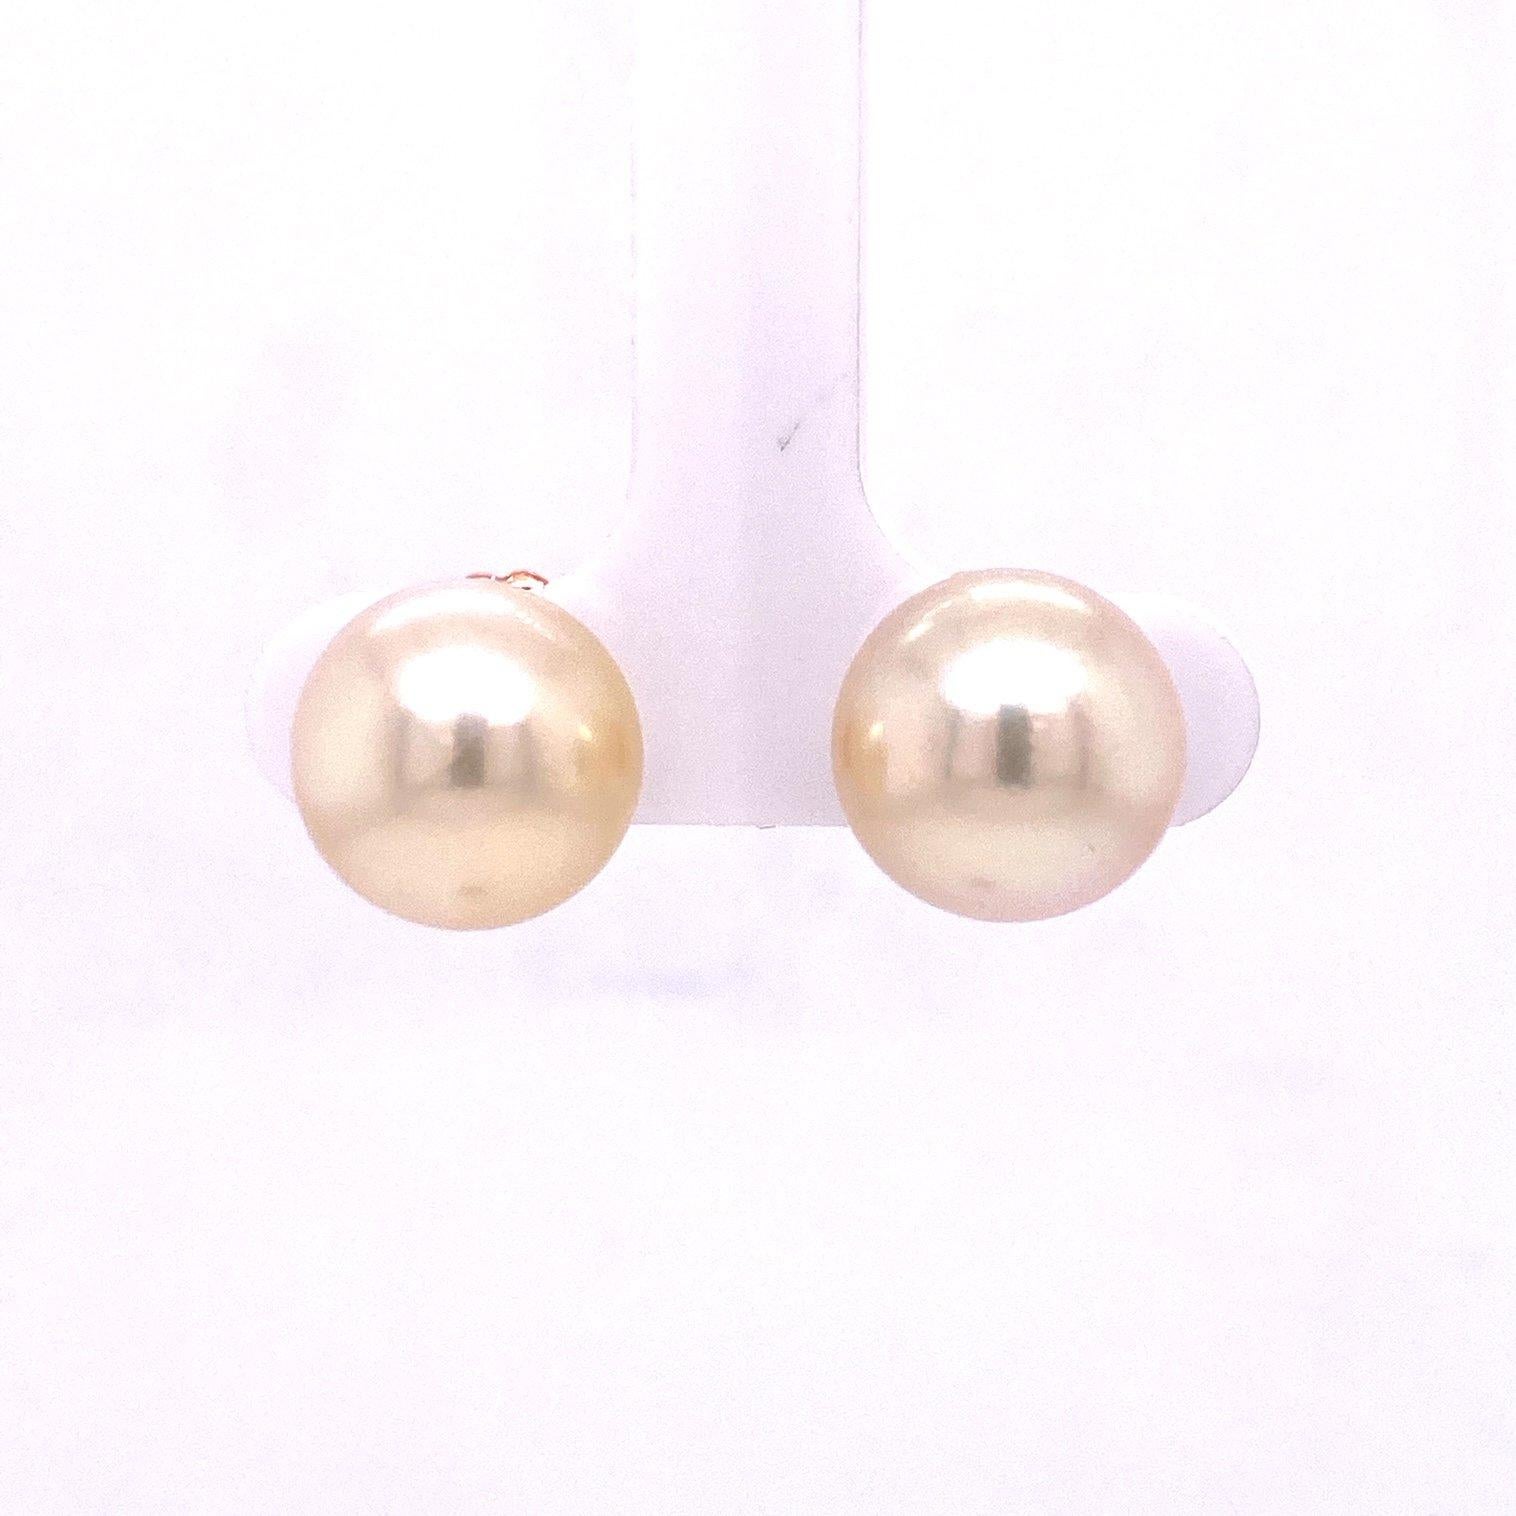 A pair of 11-12mm South Sea white pearl studs, with a pair of 18k yellow gold jackets set with two pearshaped yellow quartz, untreated from Brazil. These earrings were made and designed by llyn strong.

Items sold separately upon request.